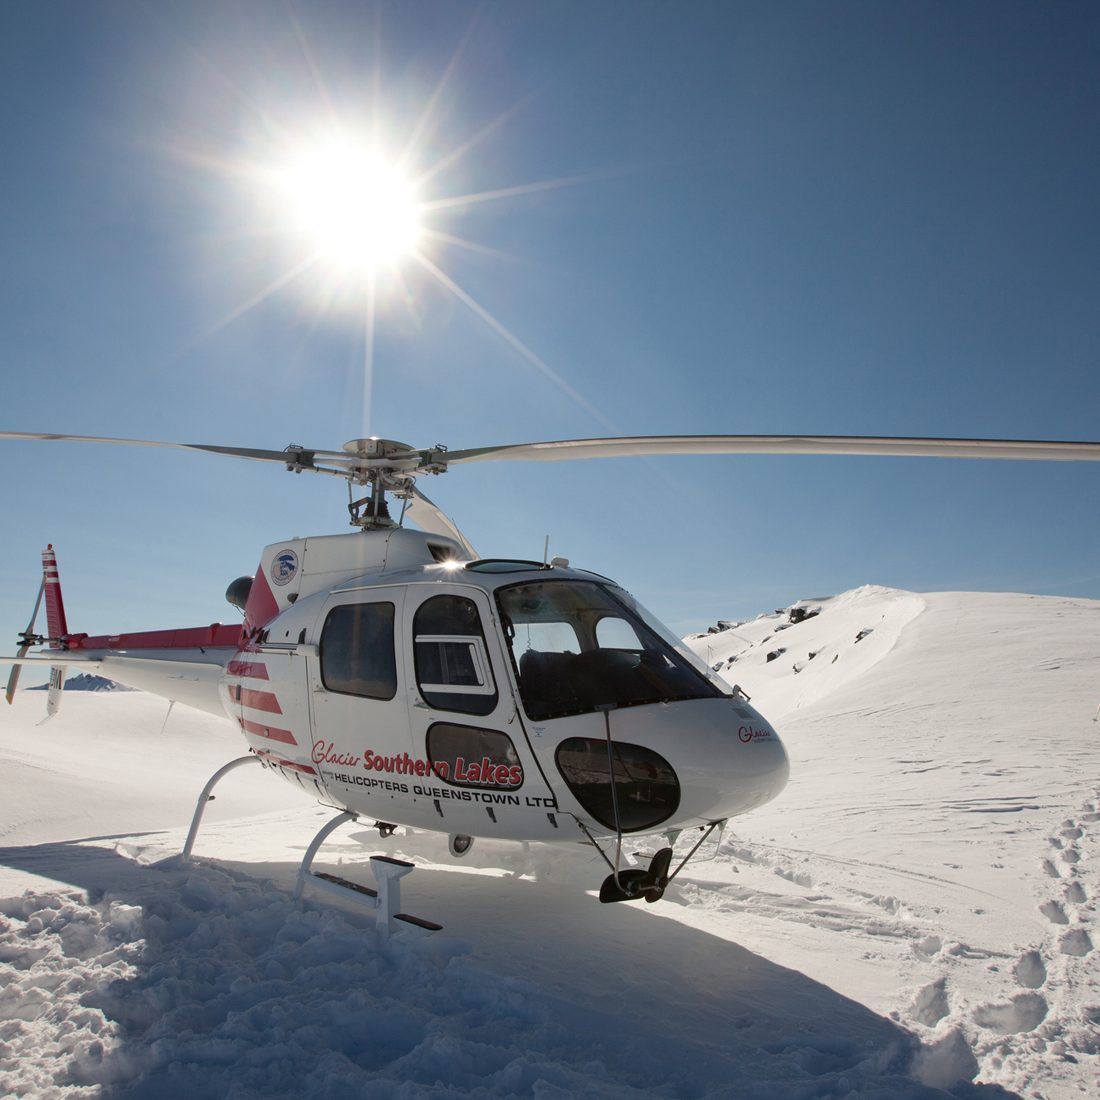 "Wanaka, New Zealand - August 23rd, 2012: Photo of helicopter taking off on mountain ridge whilst heliskiing with Southern Lakes Heliski, Wanaka, New Zealand."